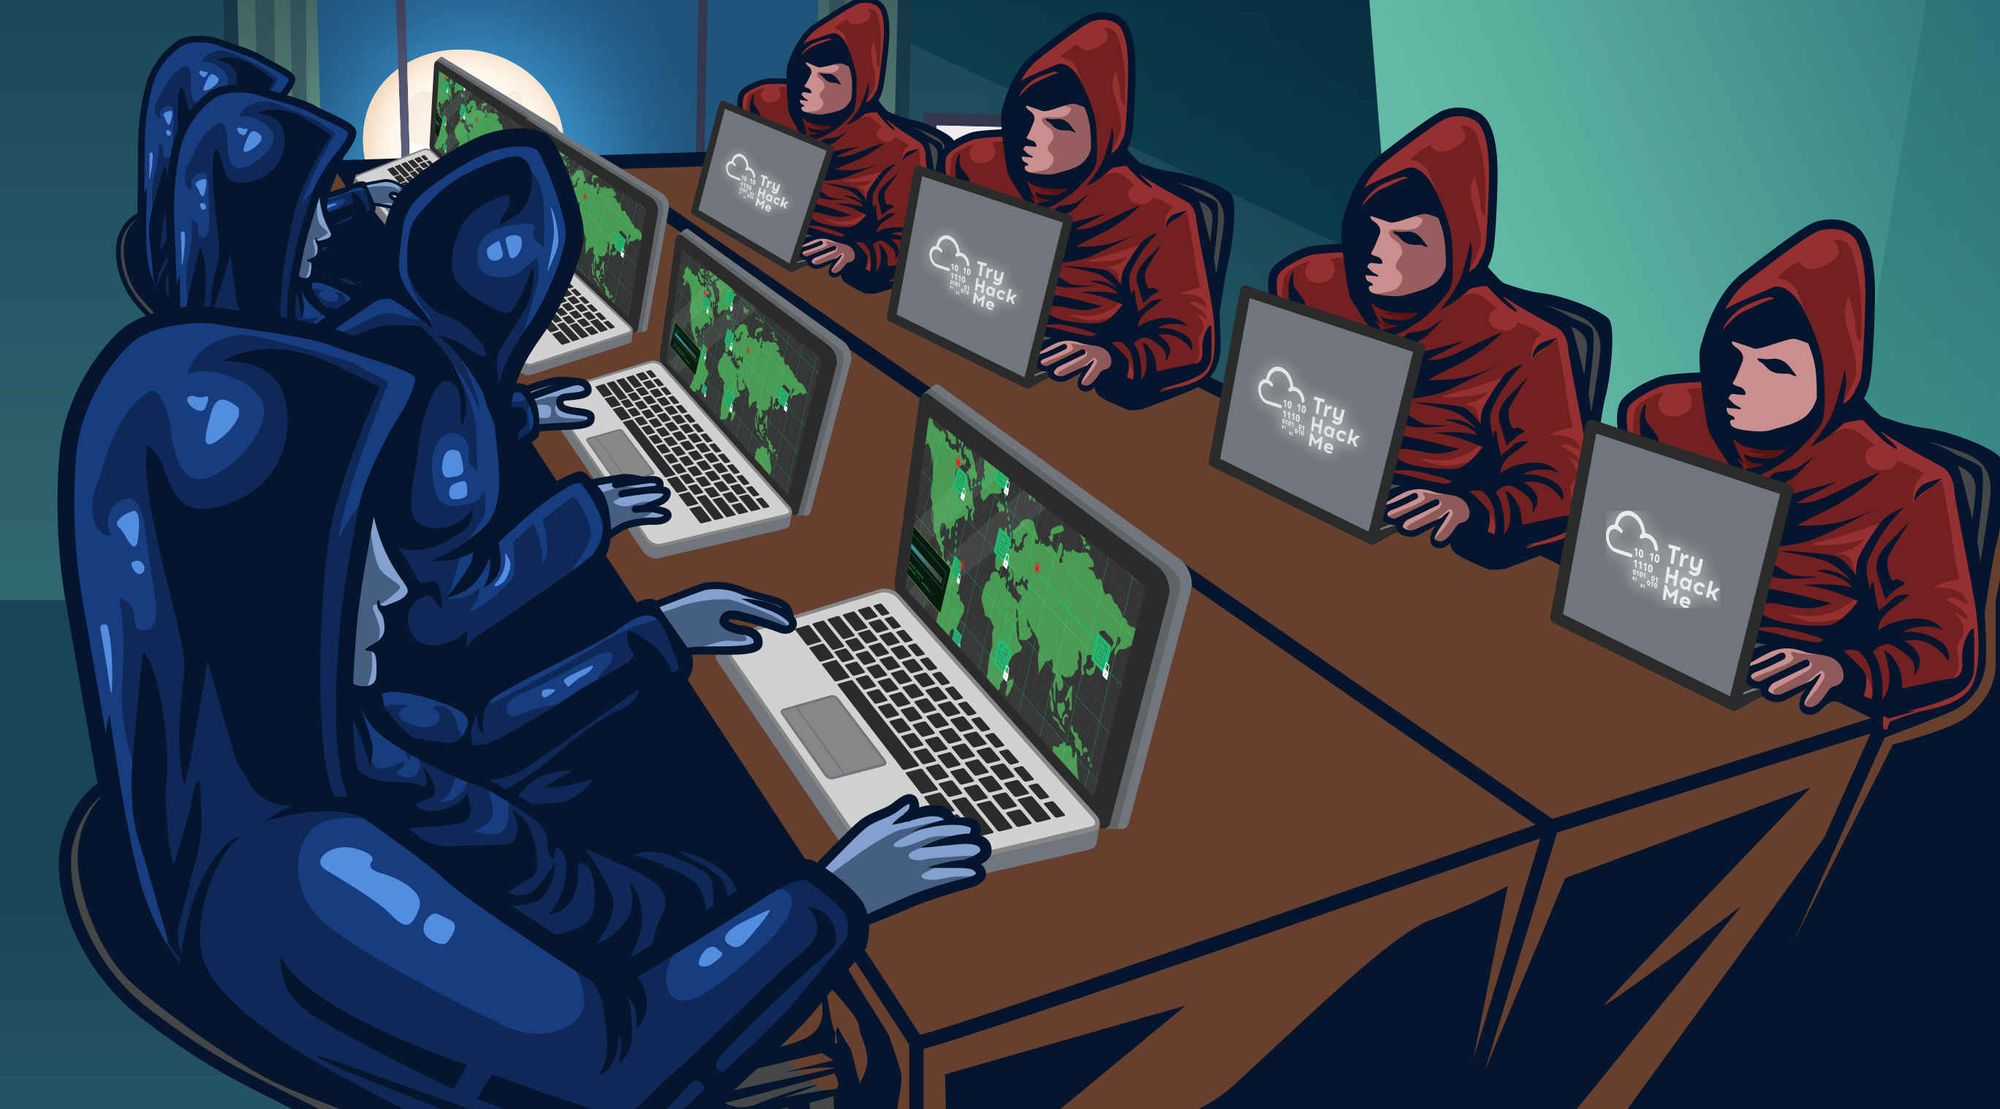 Hackers and defenders sat along a table on laptops 